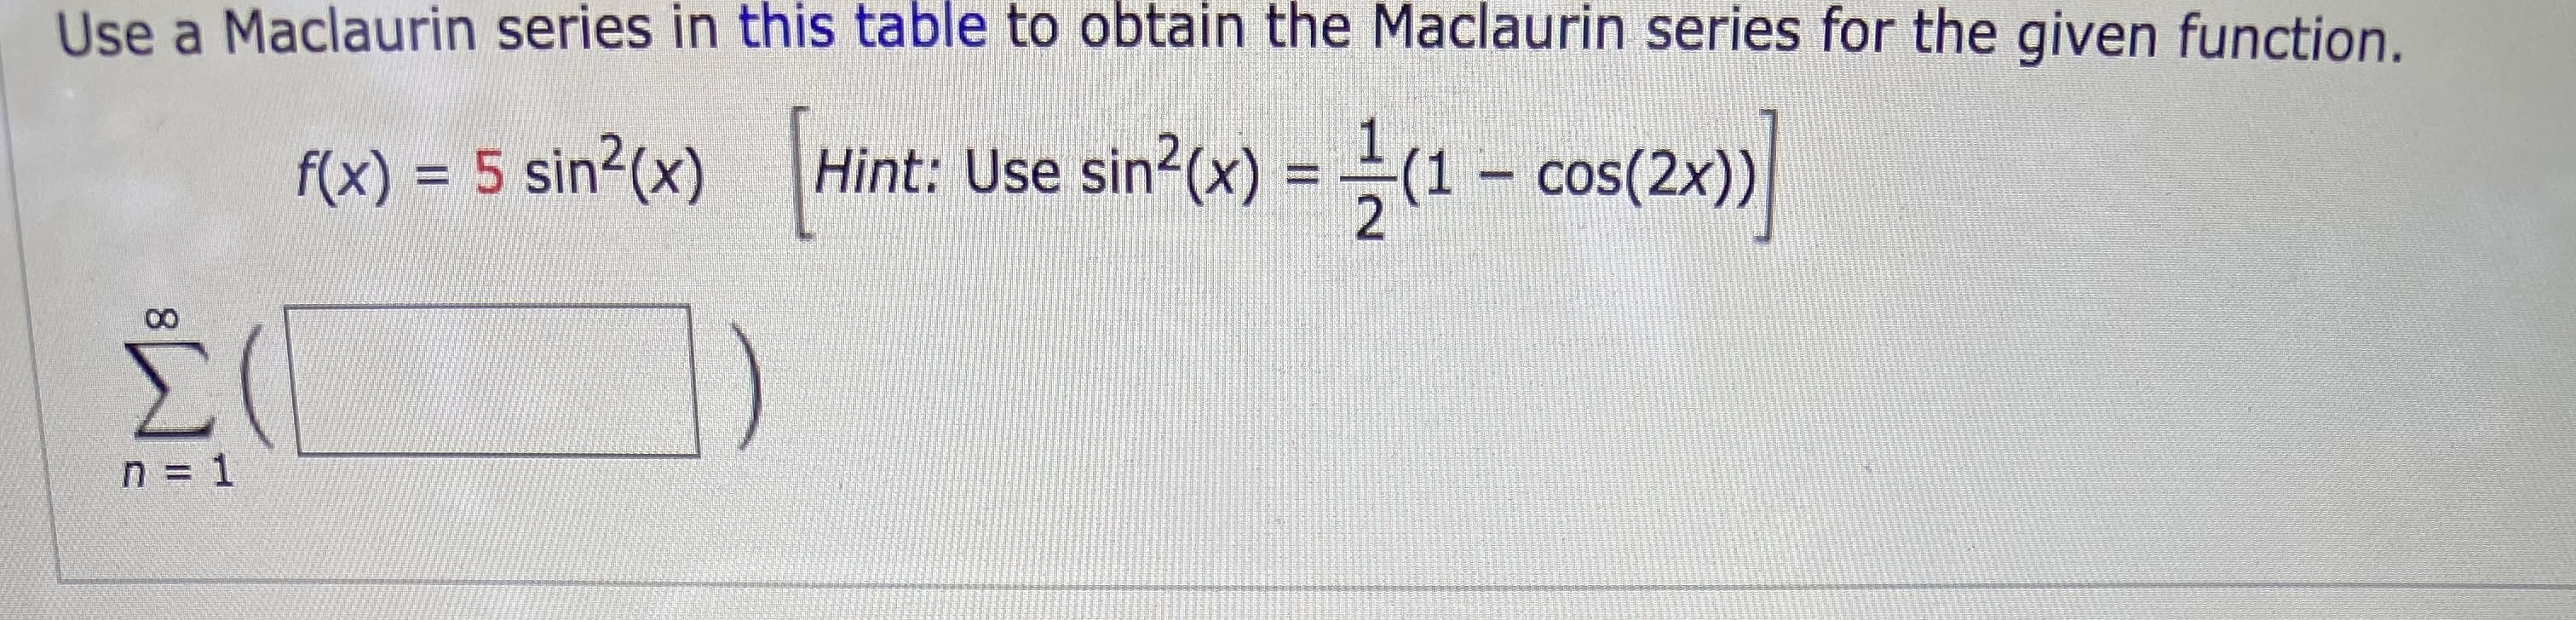 Use a Maclaurin series in this table to obtain the Maclaurin series for the given function.
f(x) = 5 sin2(x)
Hint: Use sin?(x) =(1 - cos(2x))
%3D
%3D
n = 1
8.
